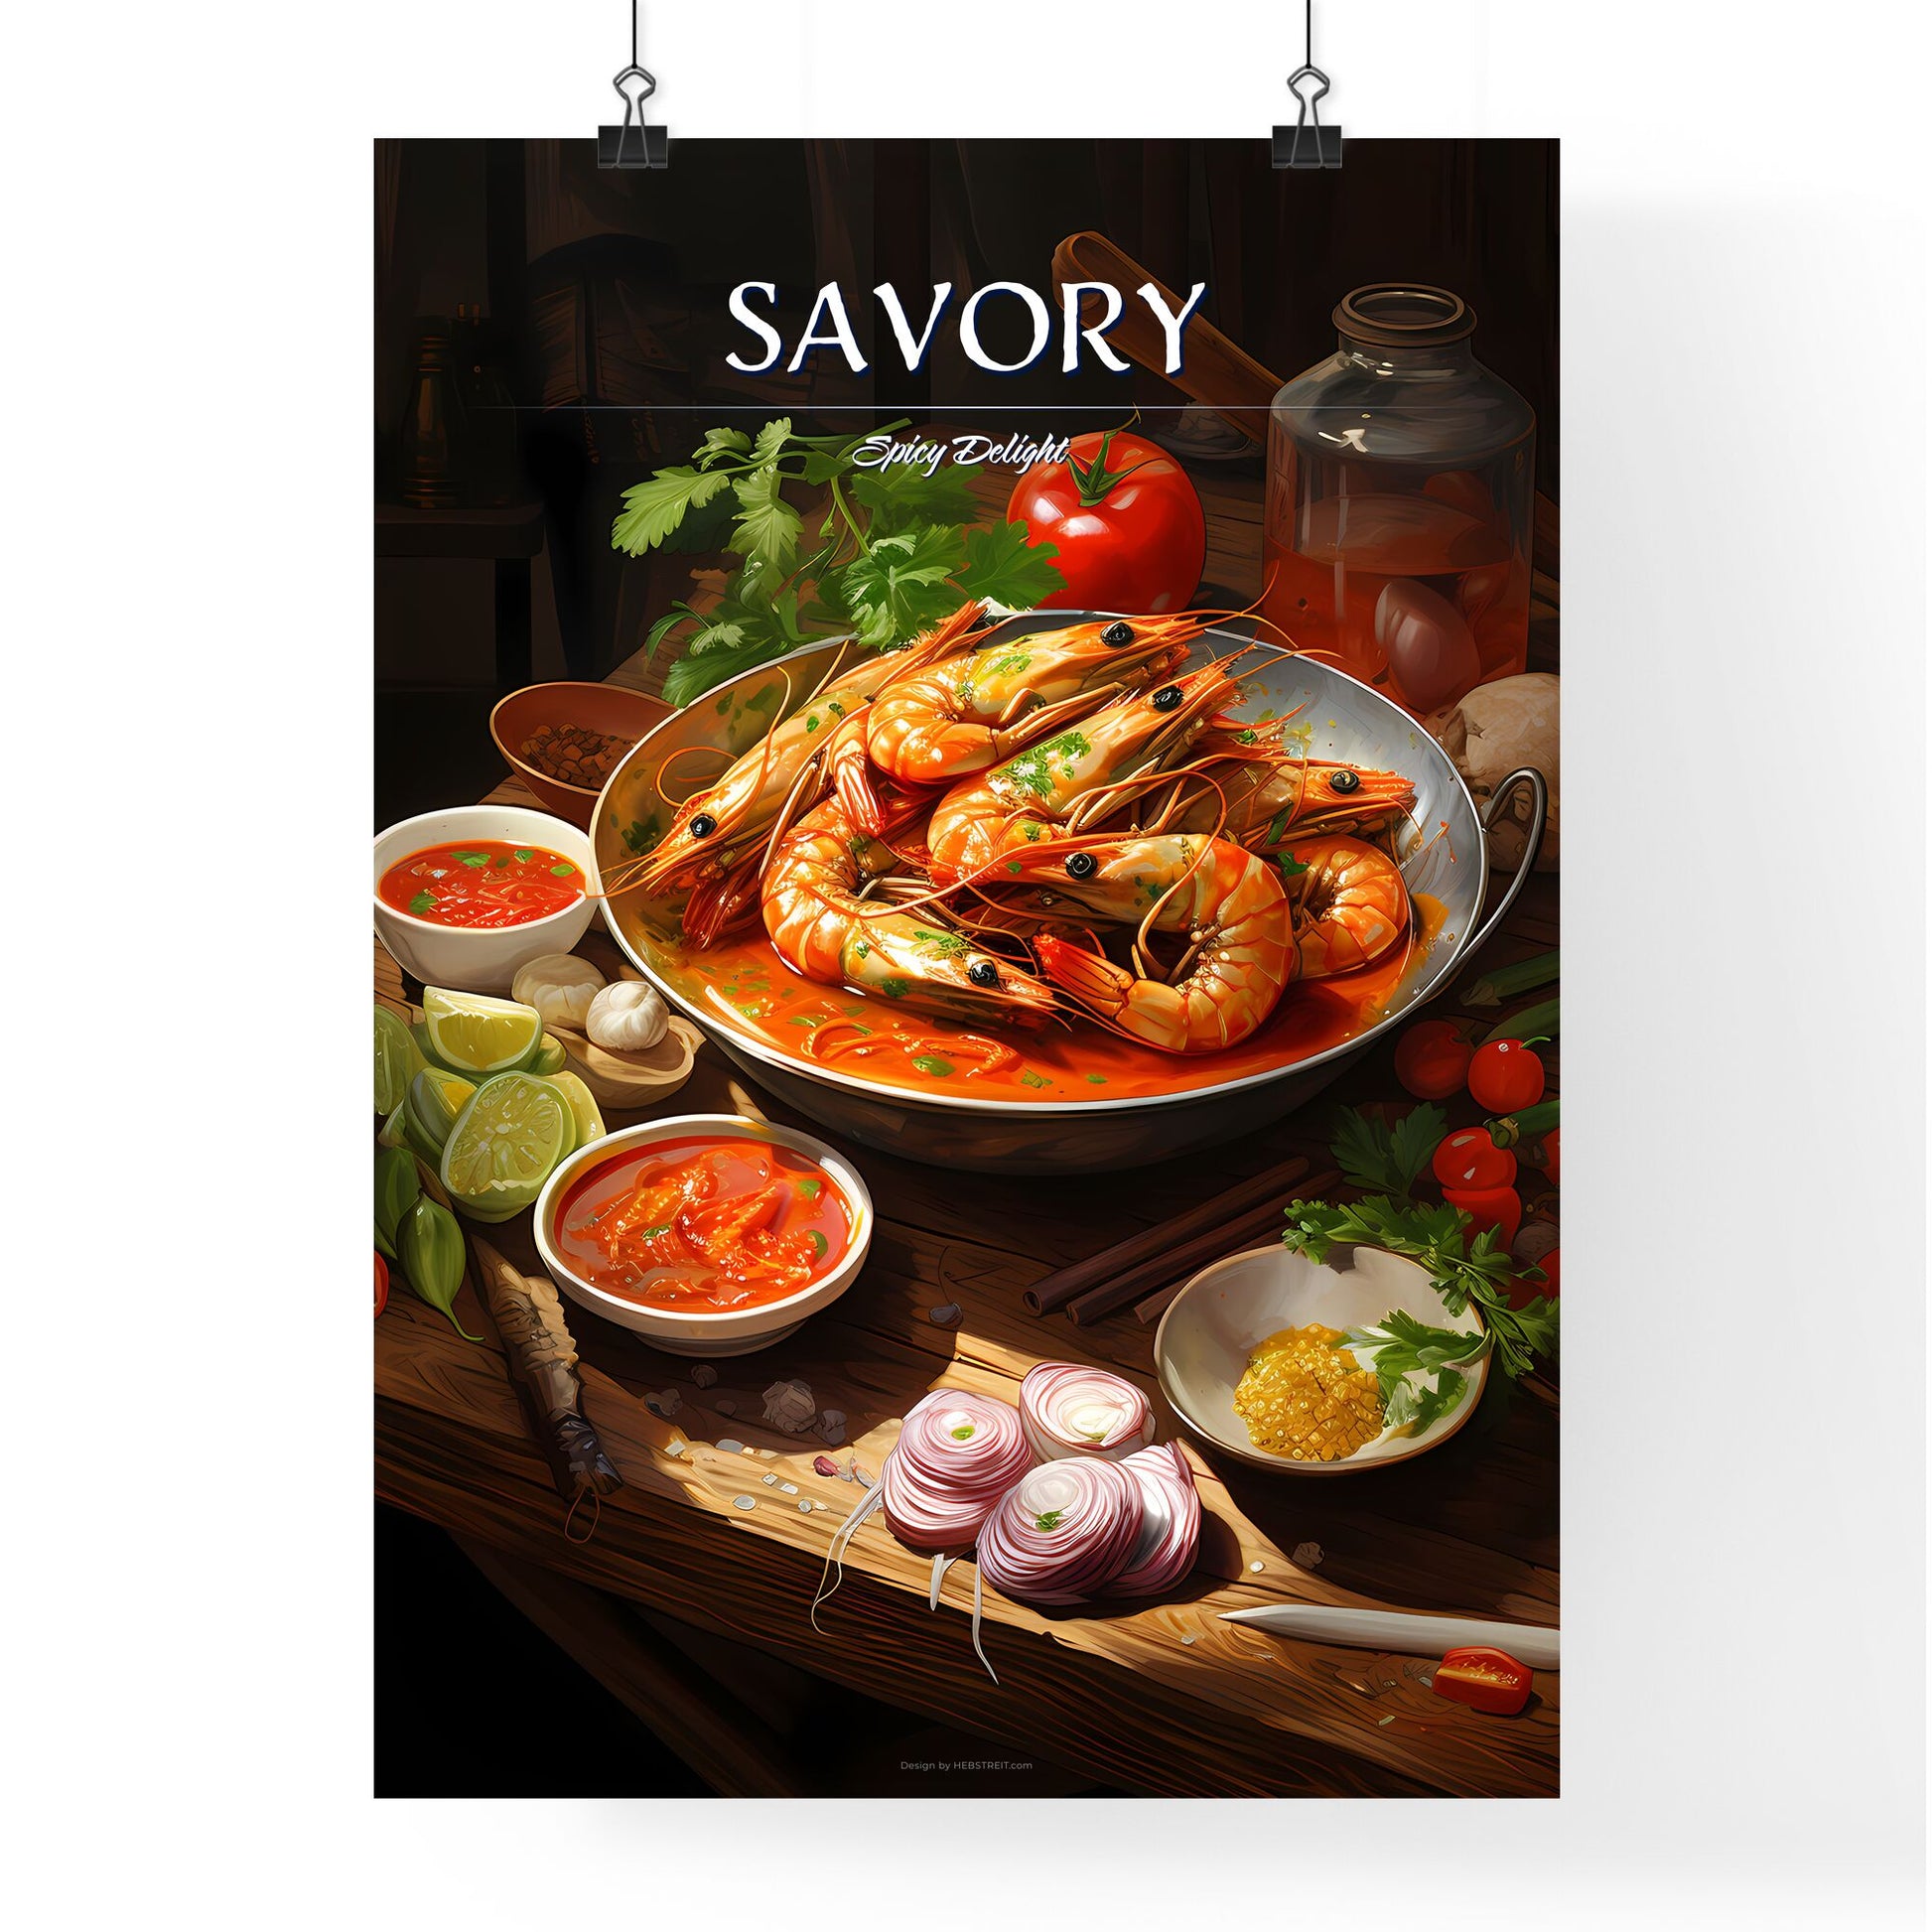 A Malaysian Traditional Curry Prawn - A Bowl Of Shrimp And Vegetables On A Table Default Title